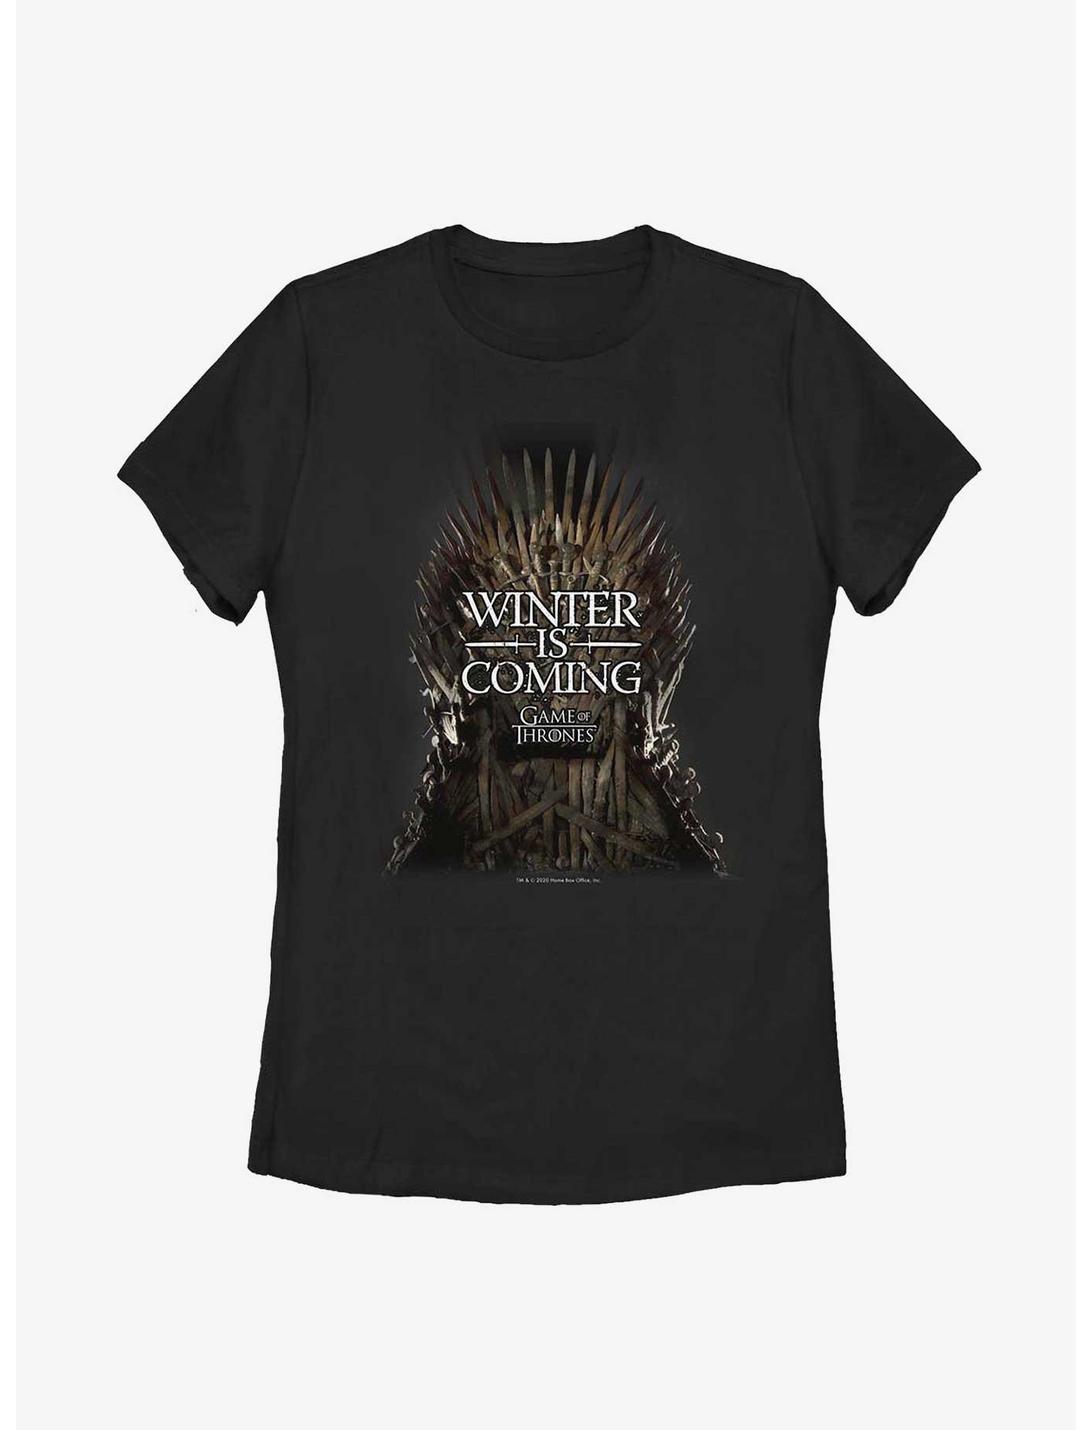 Game Of Thrones Winter Is Coming Iron Throne Womens T-Shirt, BLACK, hi-res